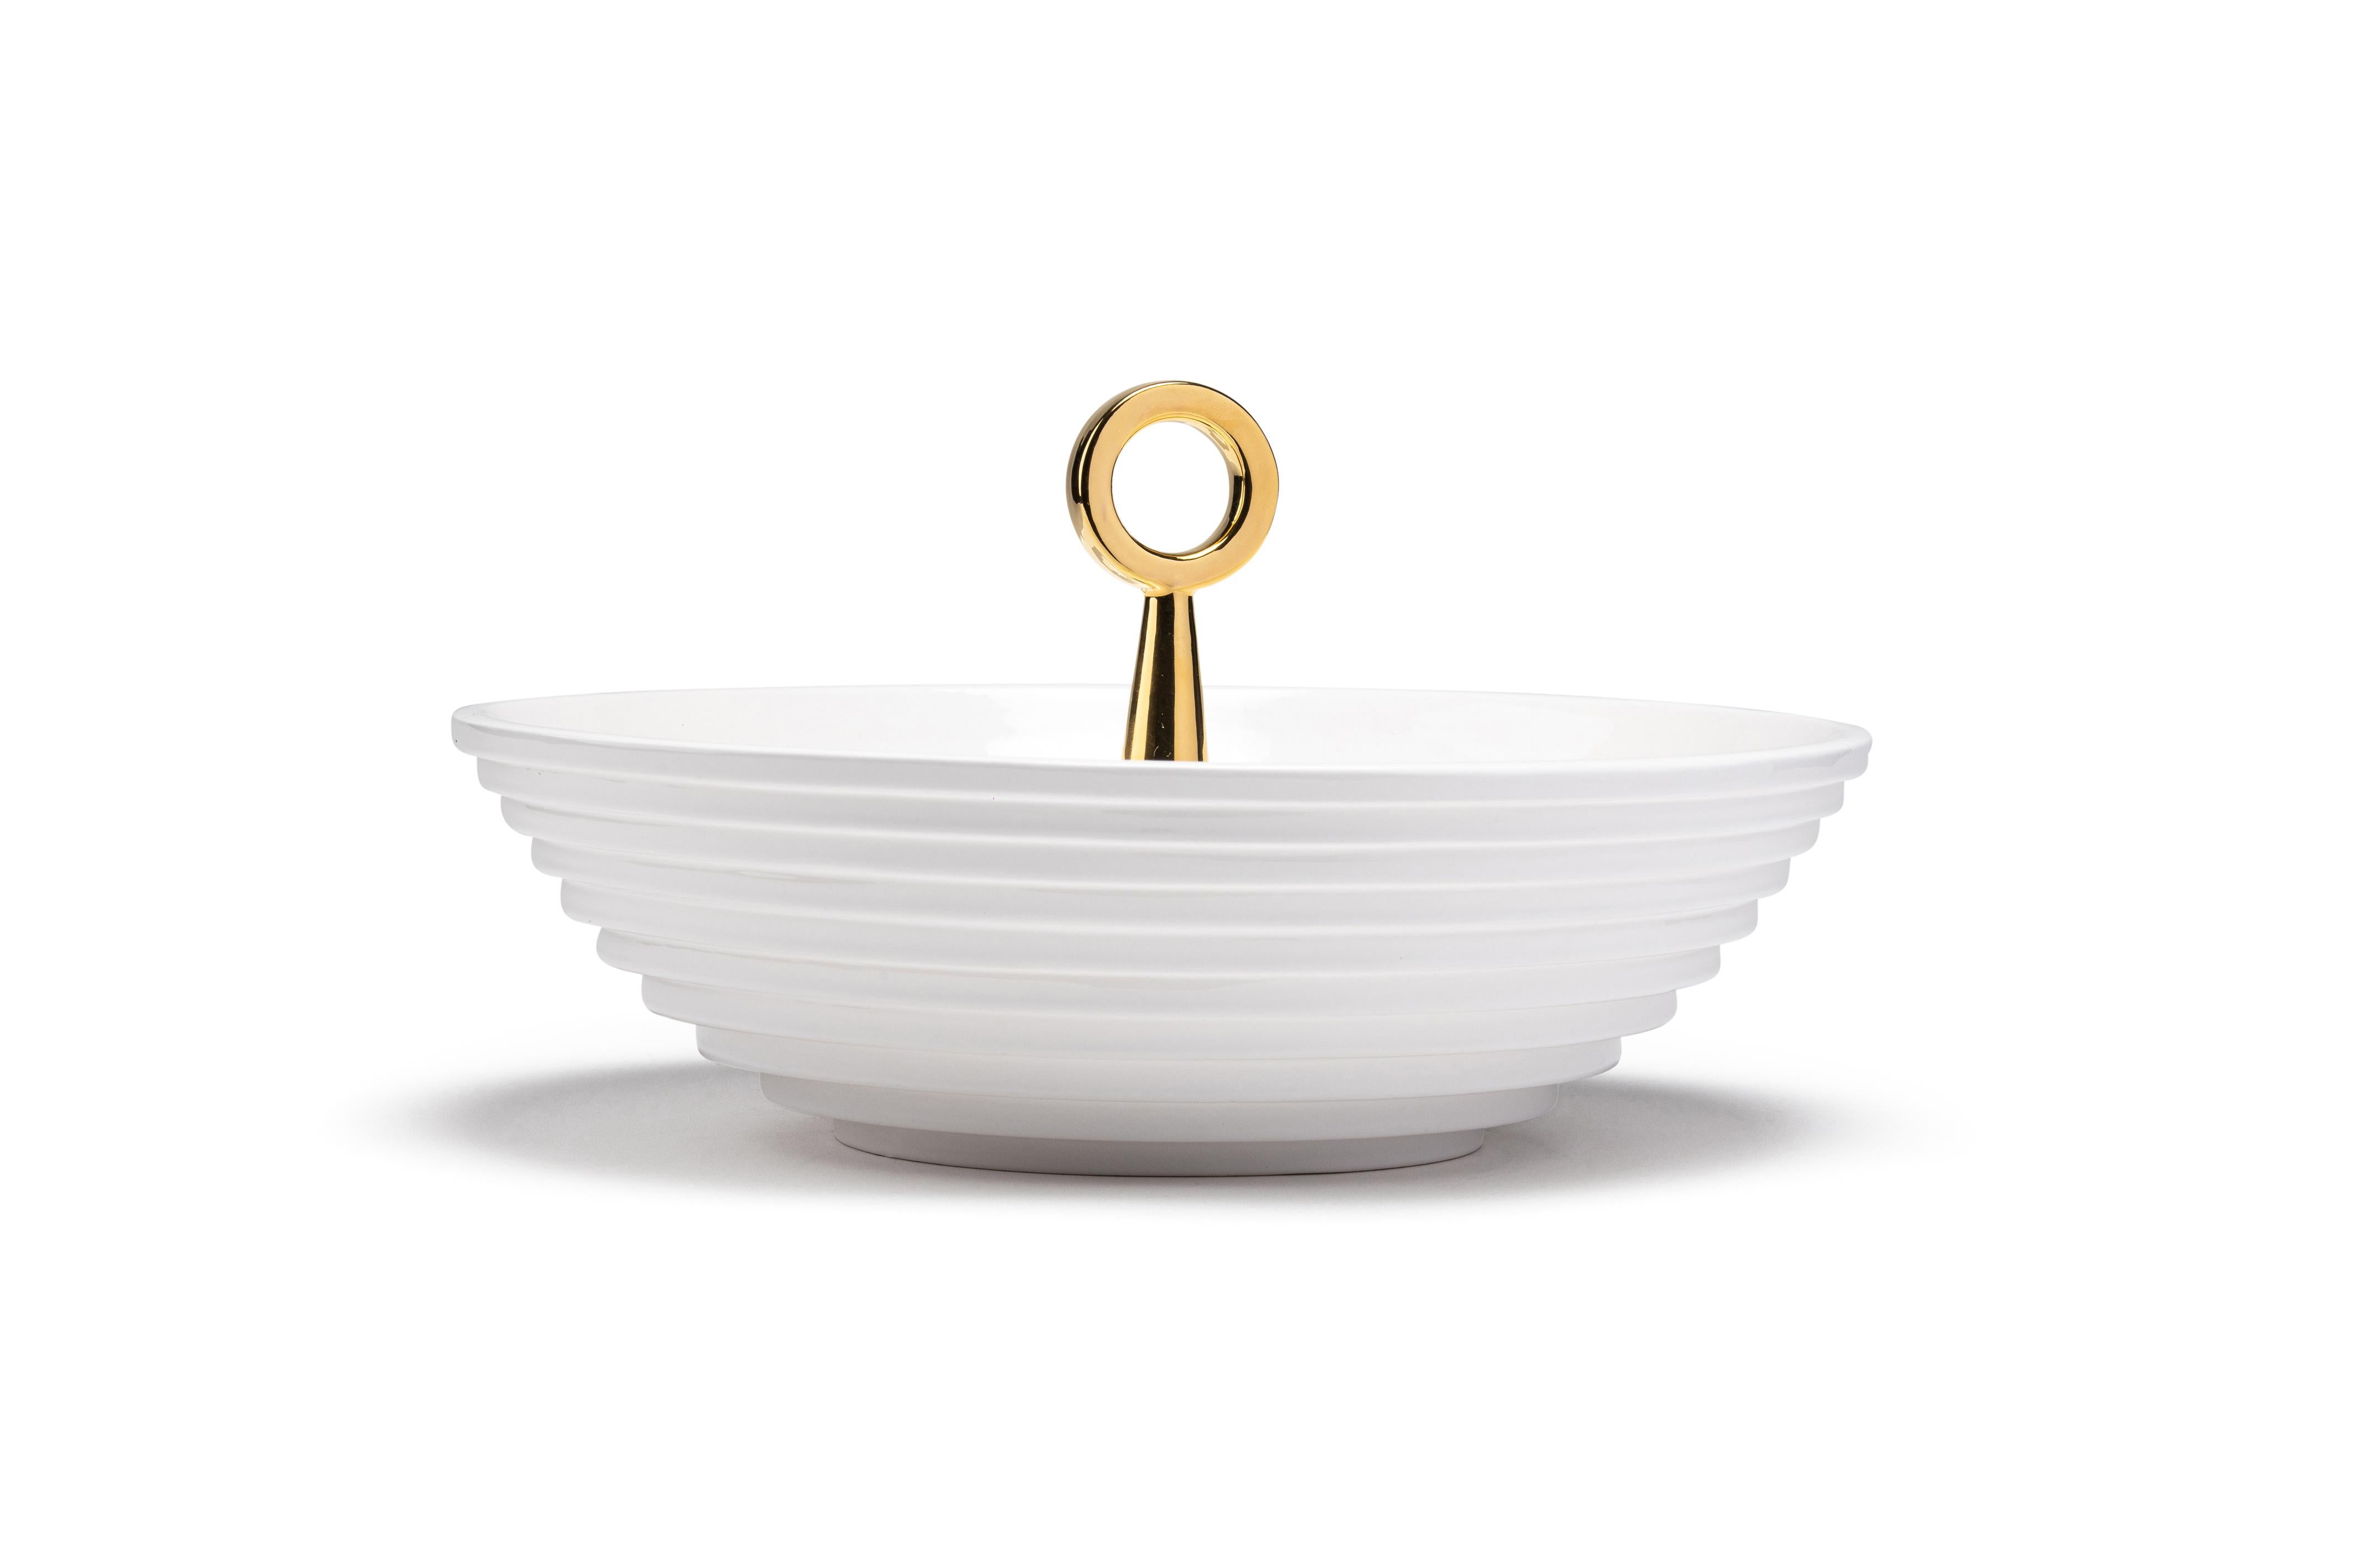 The 12:30 from the 'Meridiane' collection is a white painted ceramic bowl with 24k gold painted details. It is an accessory that can give personality to a minimalist environment and at the same time it can find its perfect location in a more classic